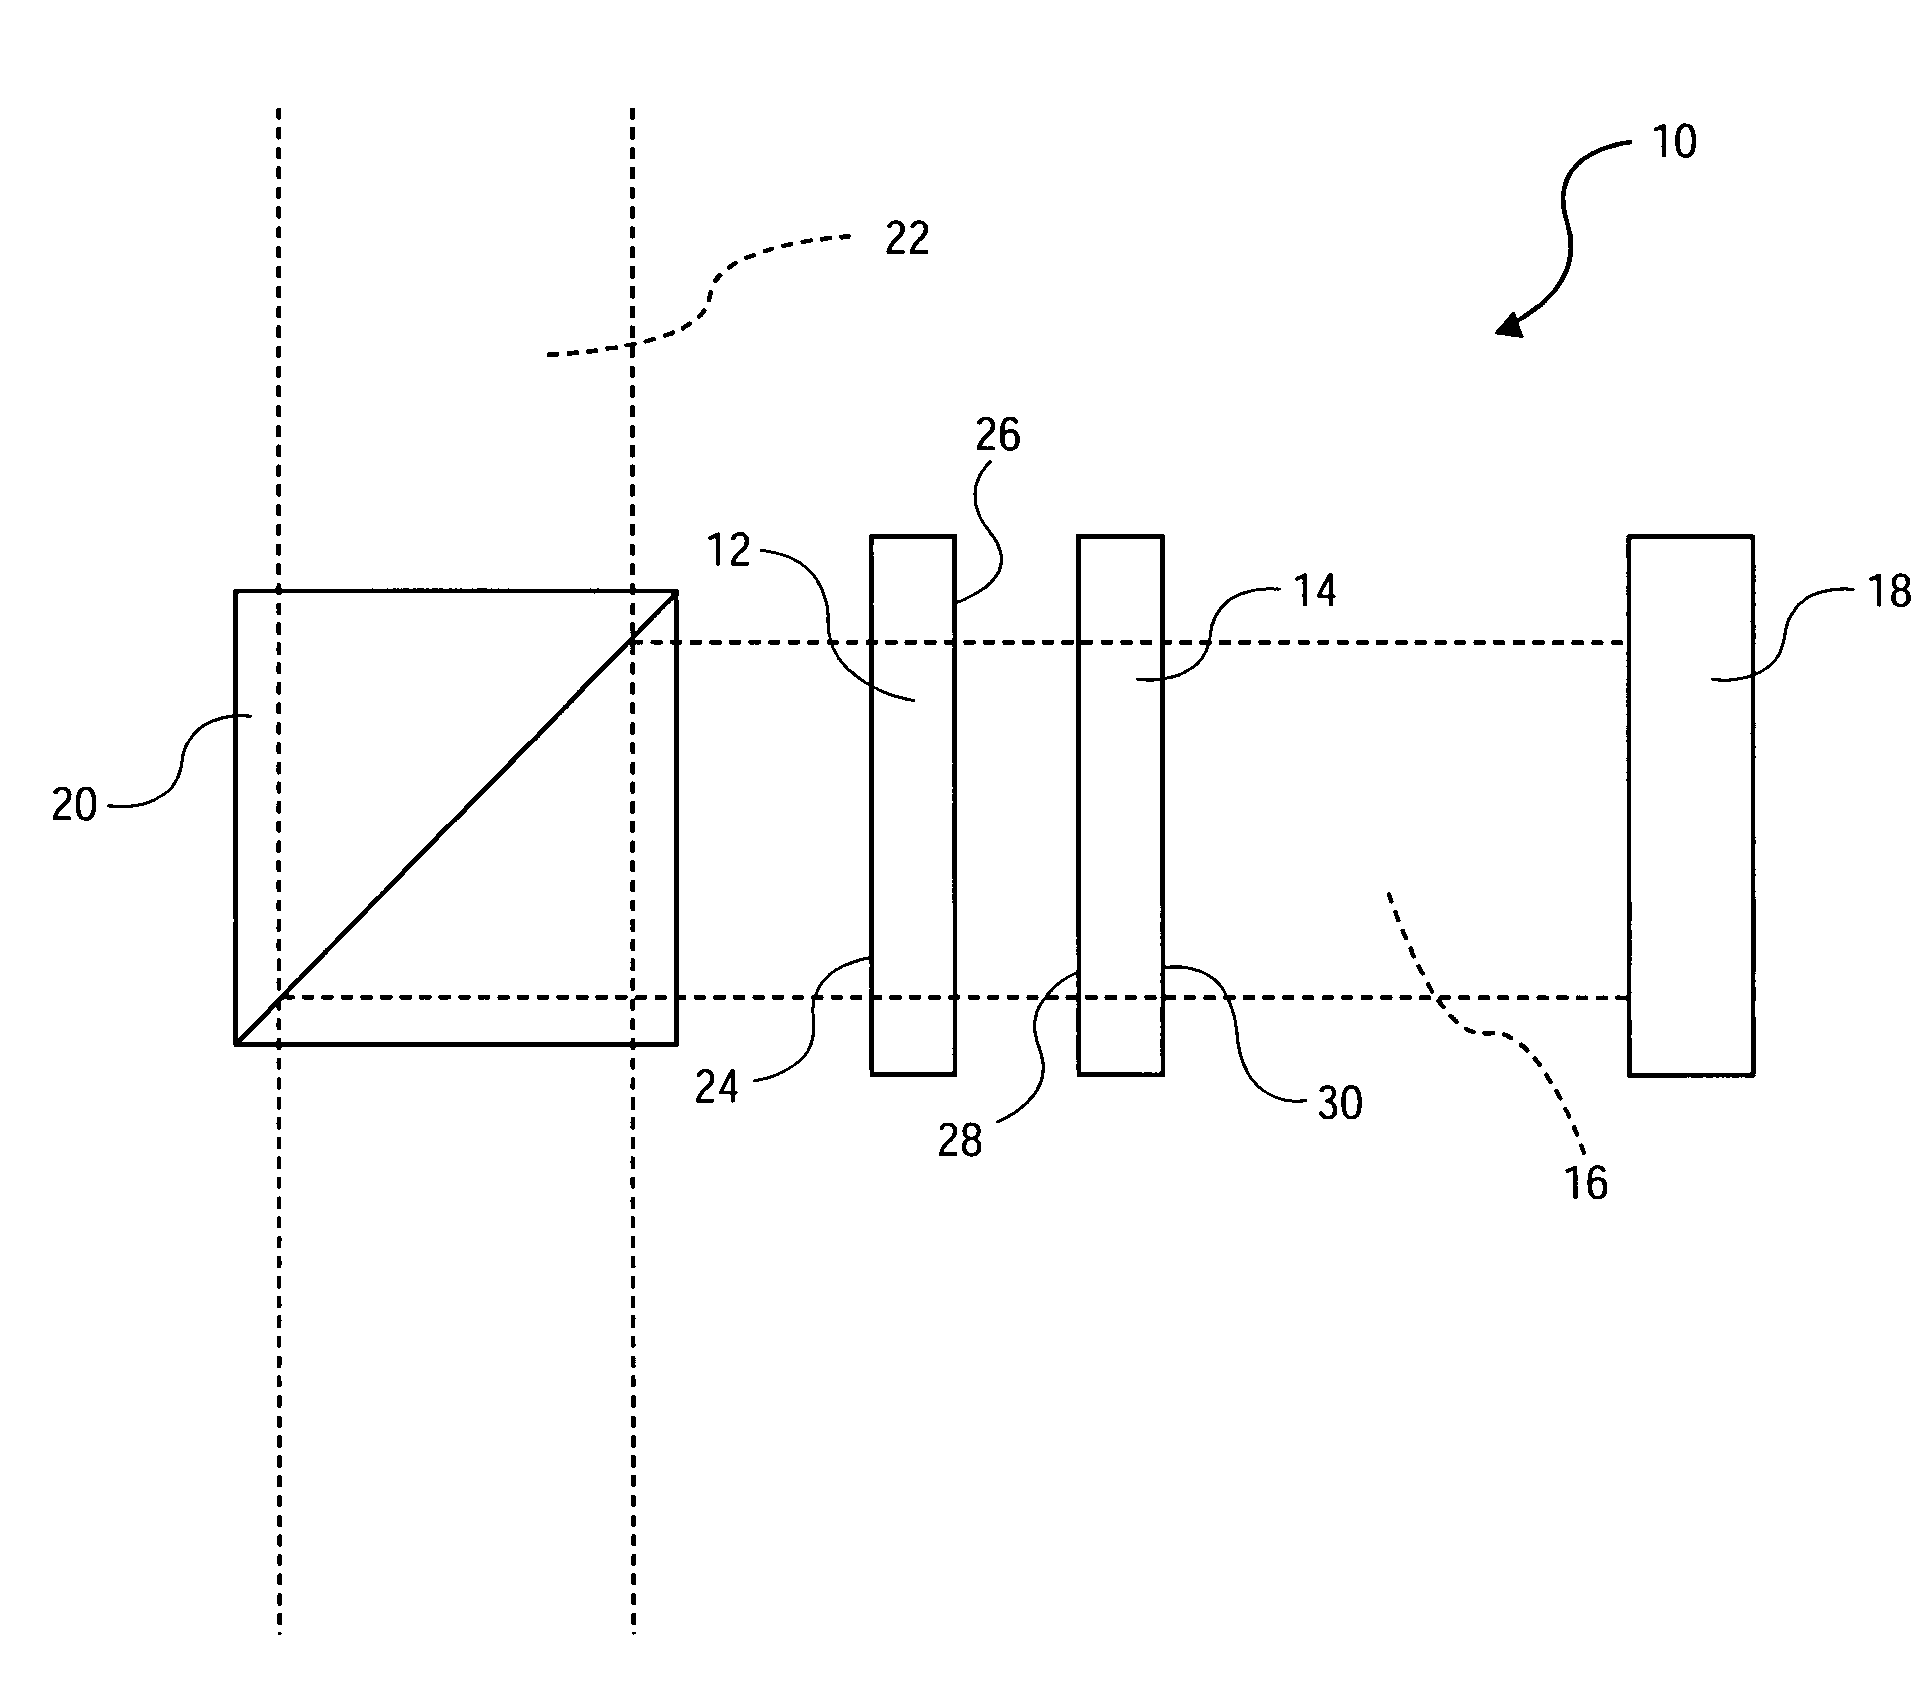 Wavelength reference apparatus and method